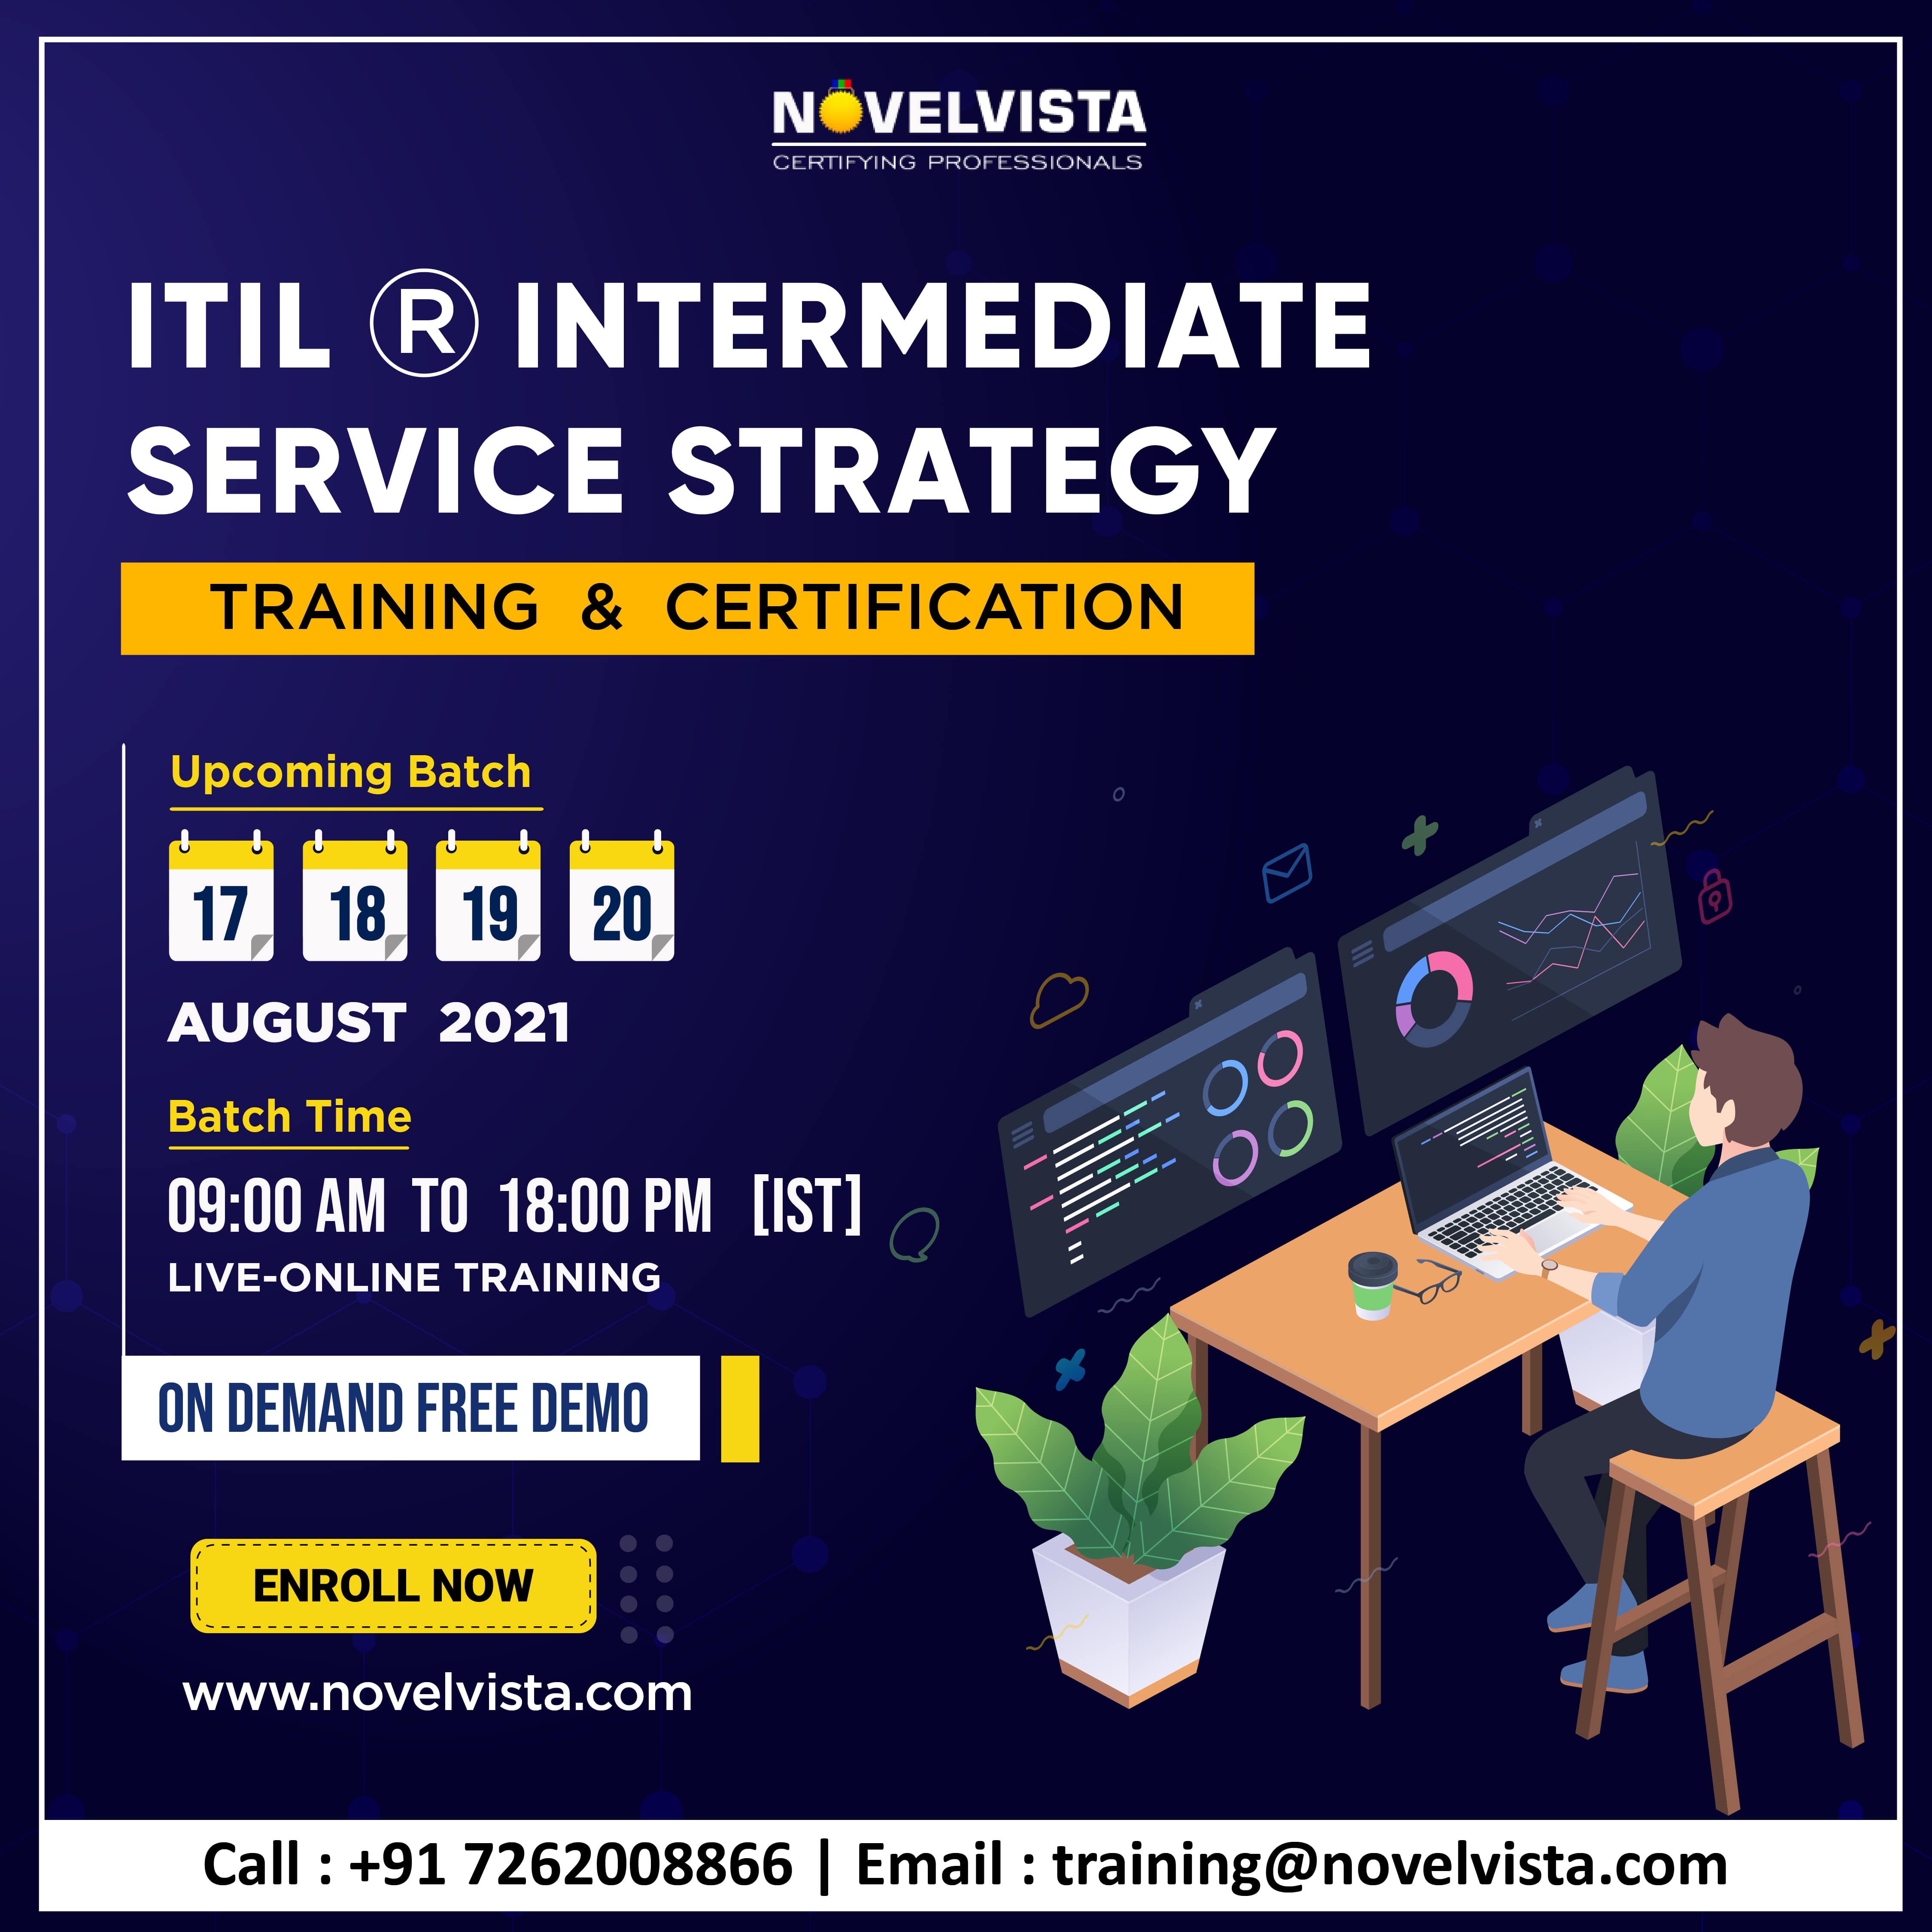 Register Now For Our ITIL® Intermediate Service Strategy Training and Certification Programs., Pune, Maharashtra, India